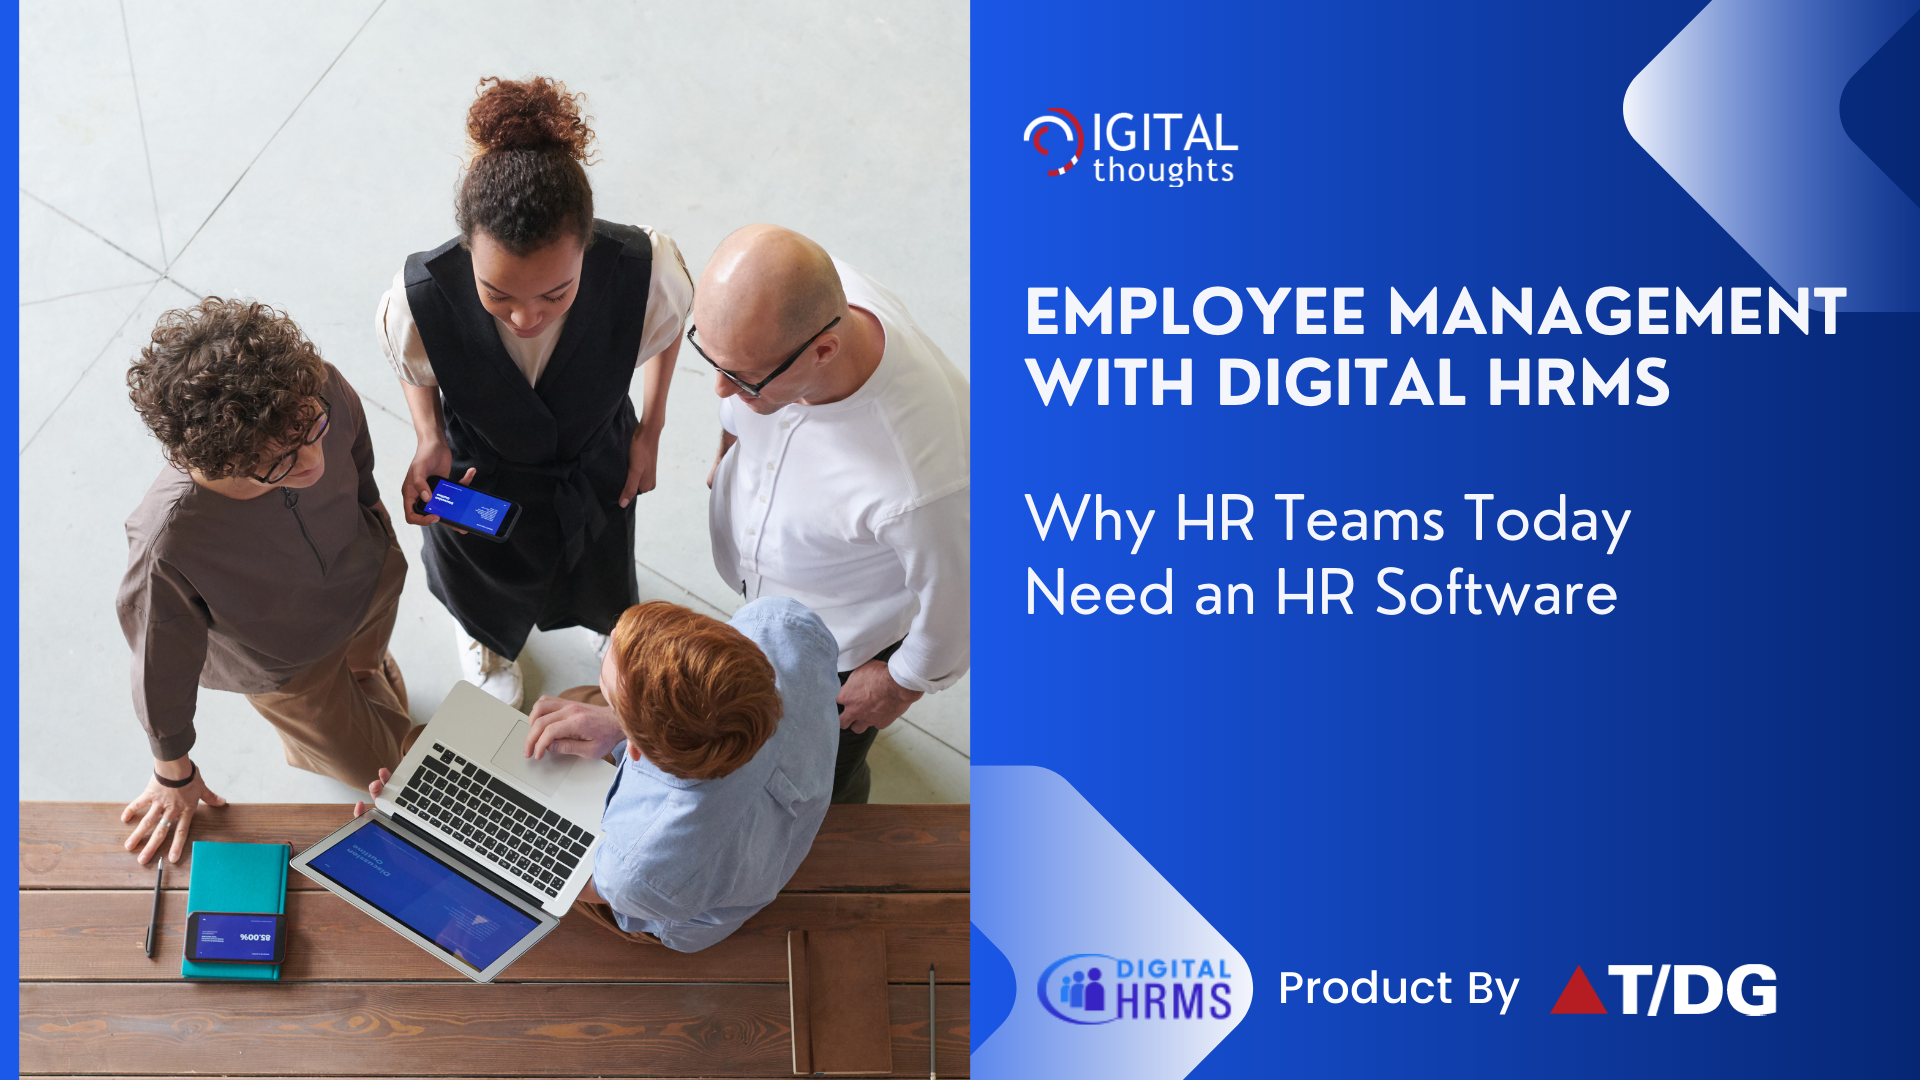 Employee Management with Digital HRMS: Benefits of a New Age HR Software for Employee Management